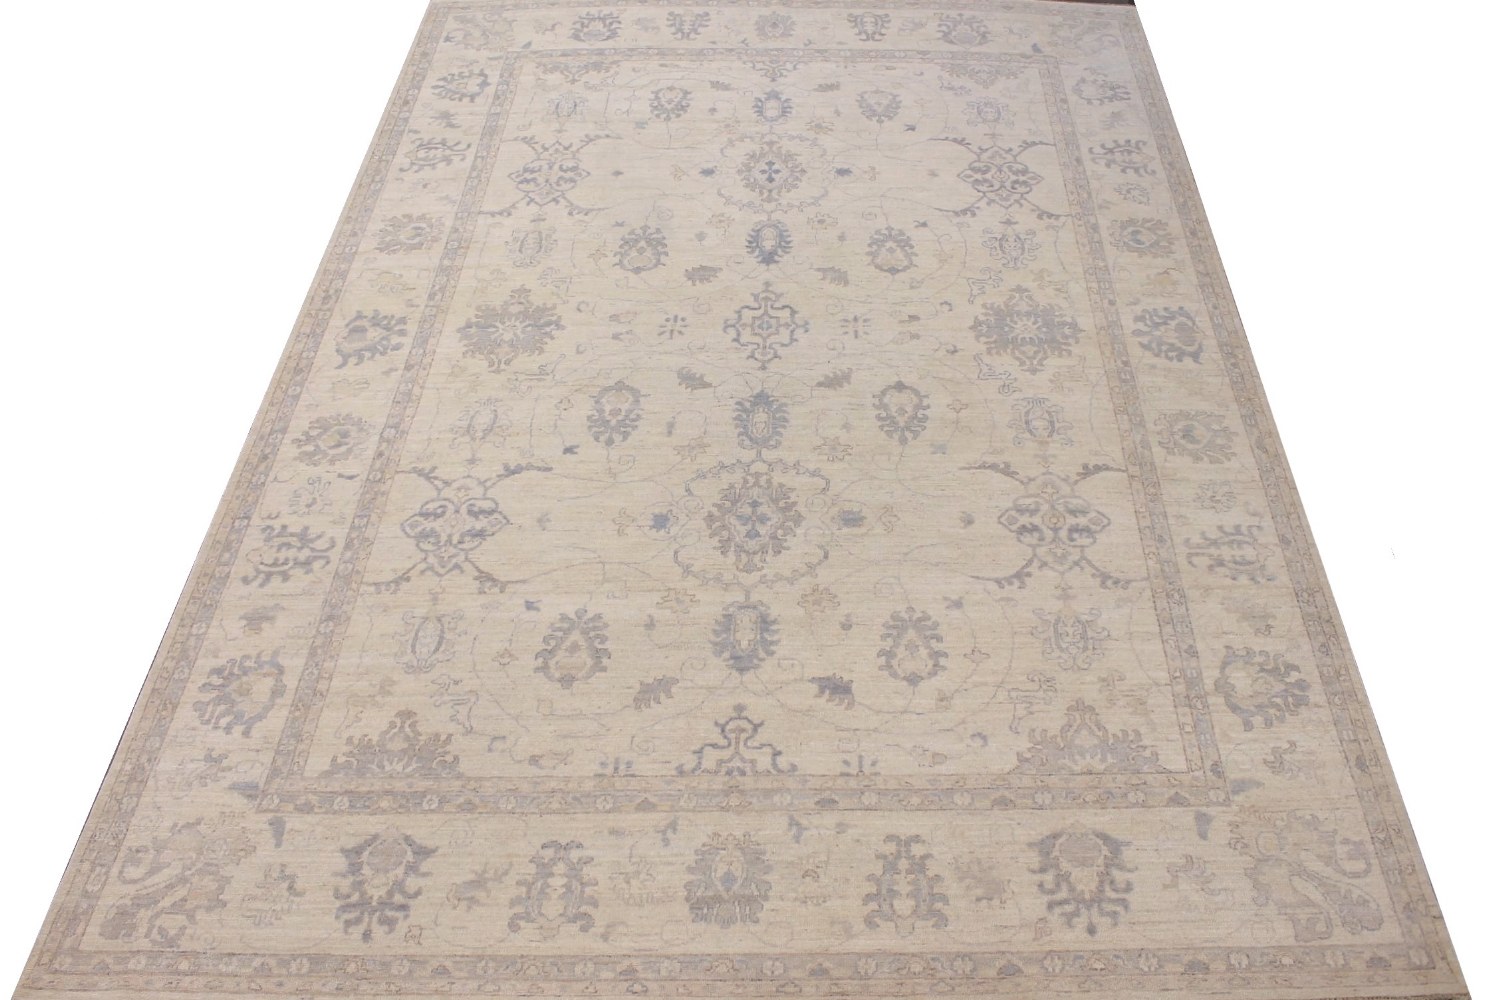 9x12 Peshawar Hand Knotted Wool Area Rug - MR026115